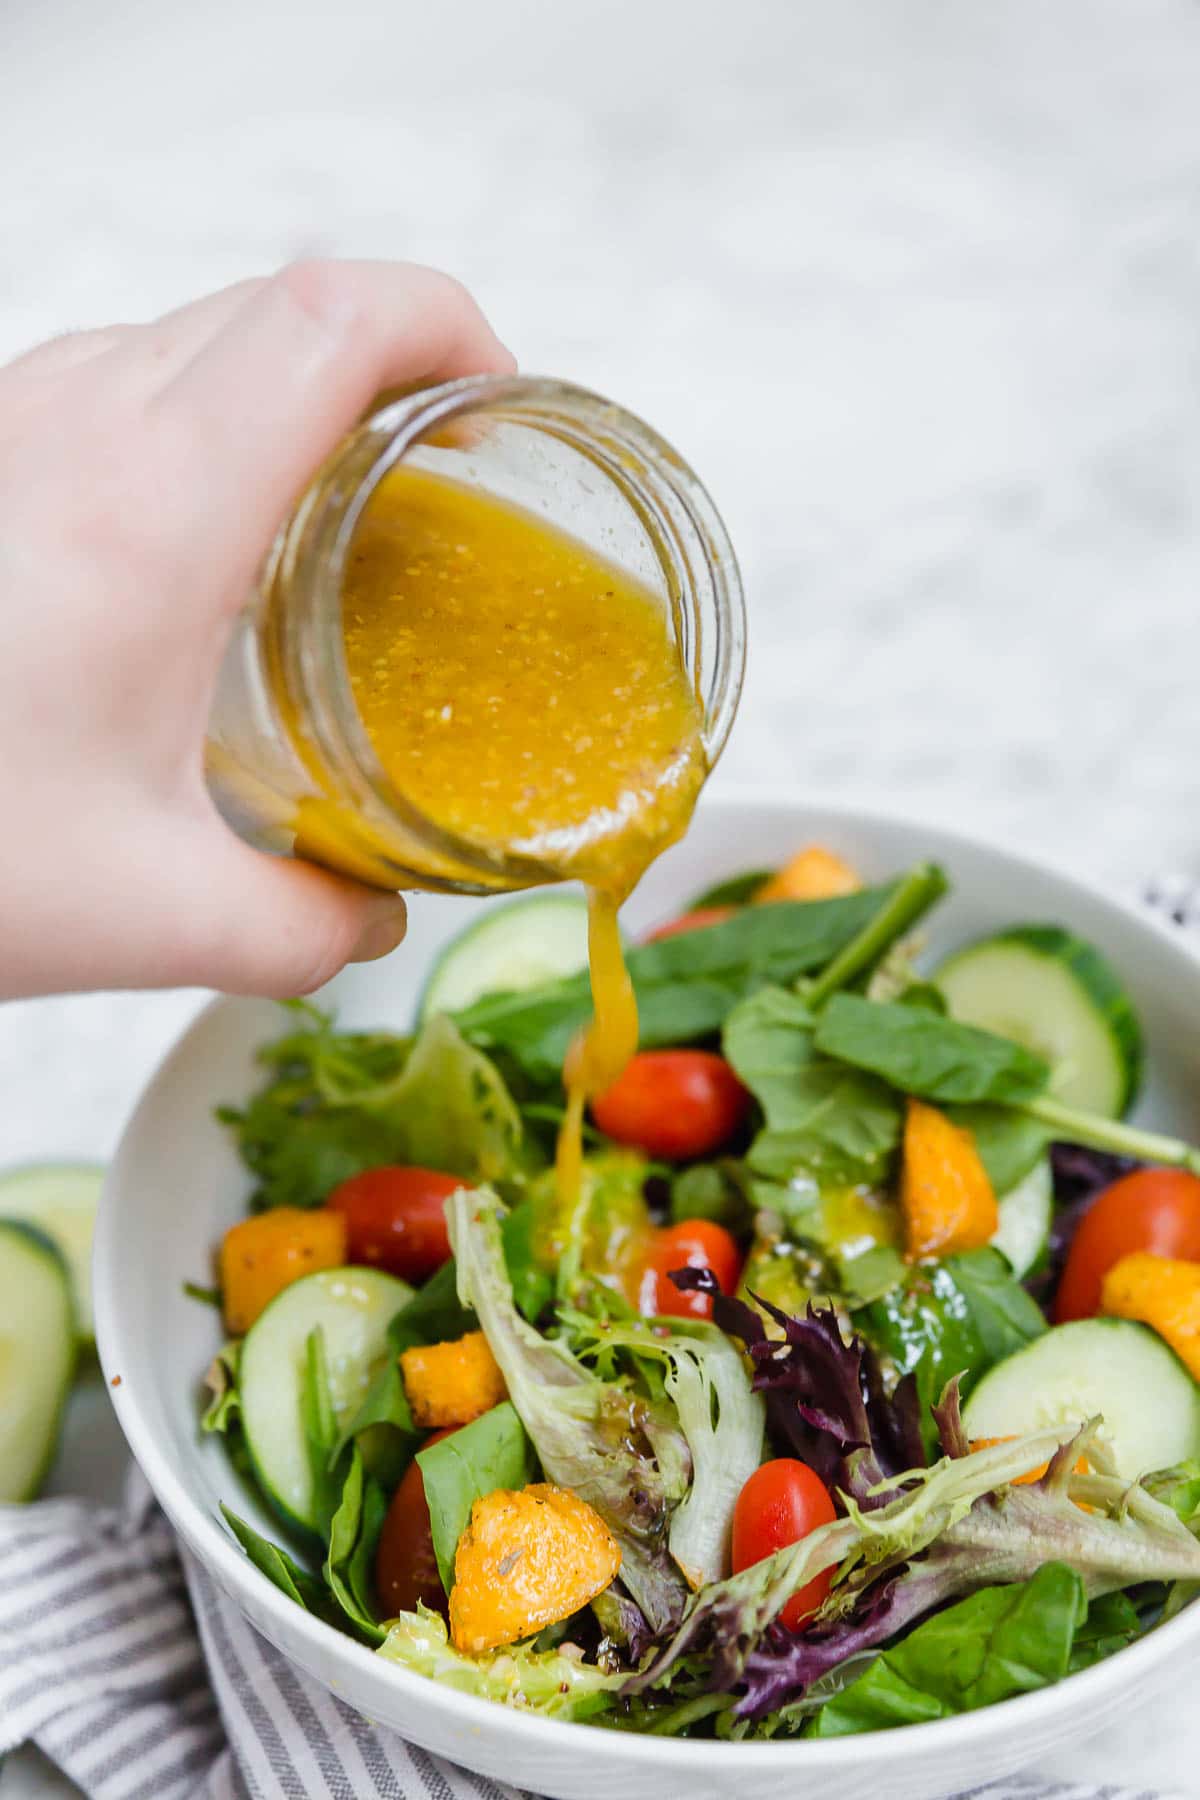 Gluten-Free honey mustard vinaigrette being poured onto a colorful salad.